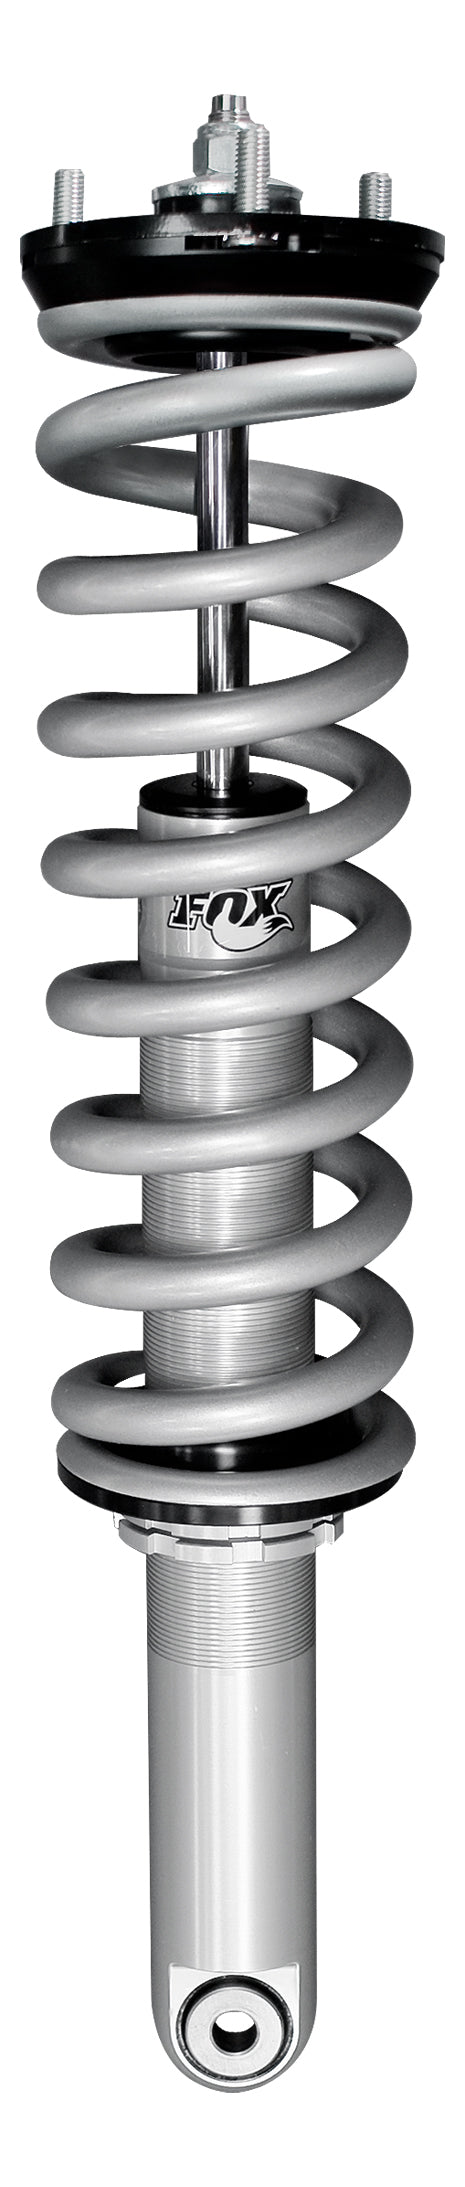 Fox Racing Shox 985-02-006 Performance Series Coil Over Shock Absorber